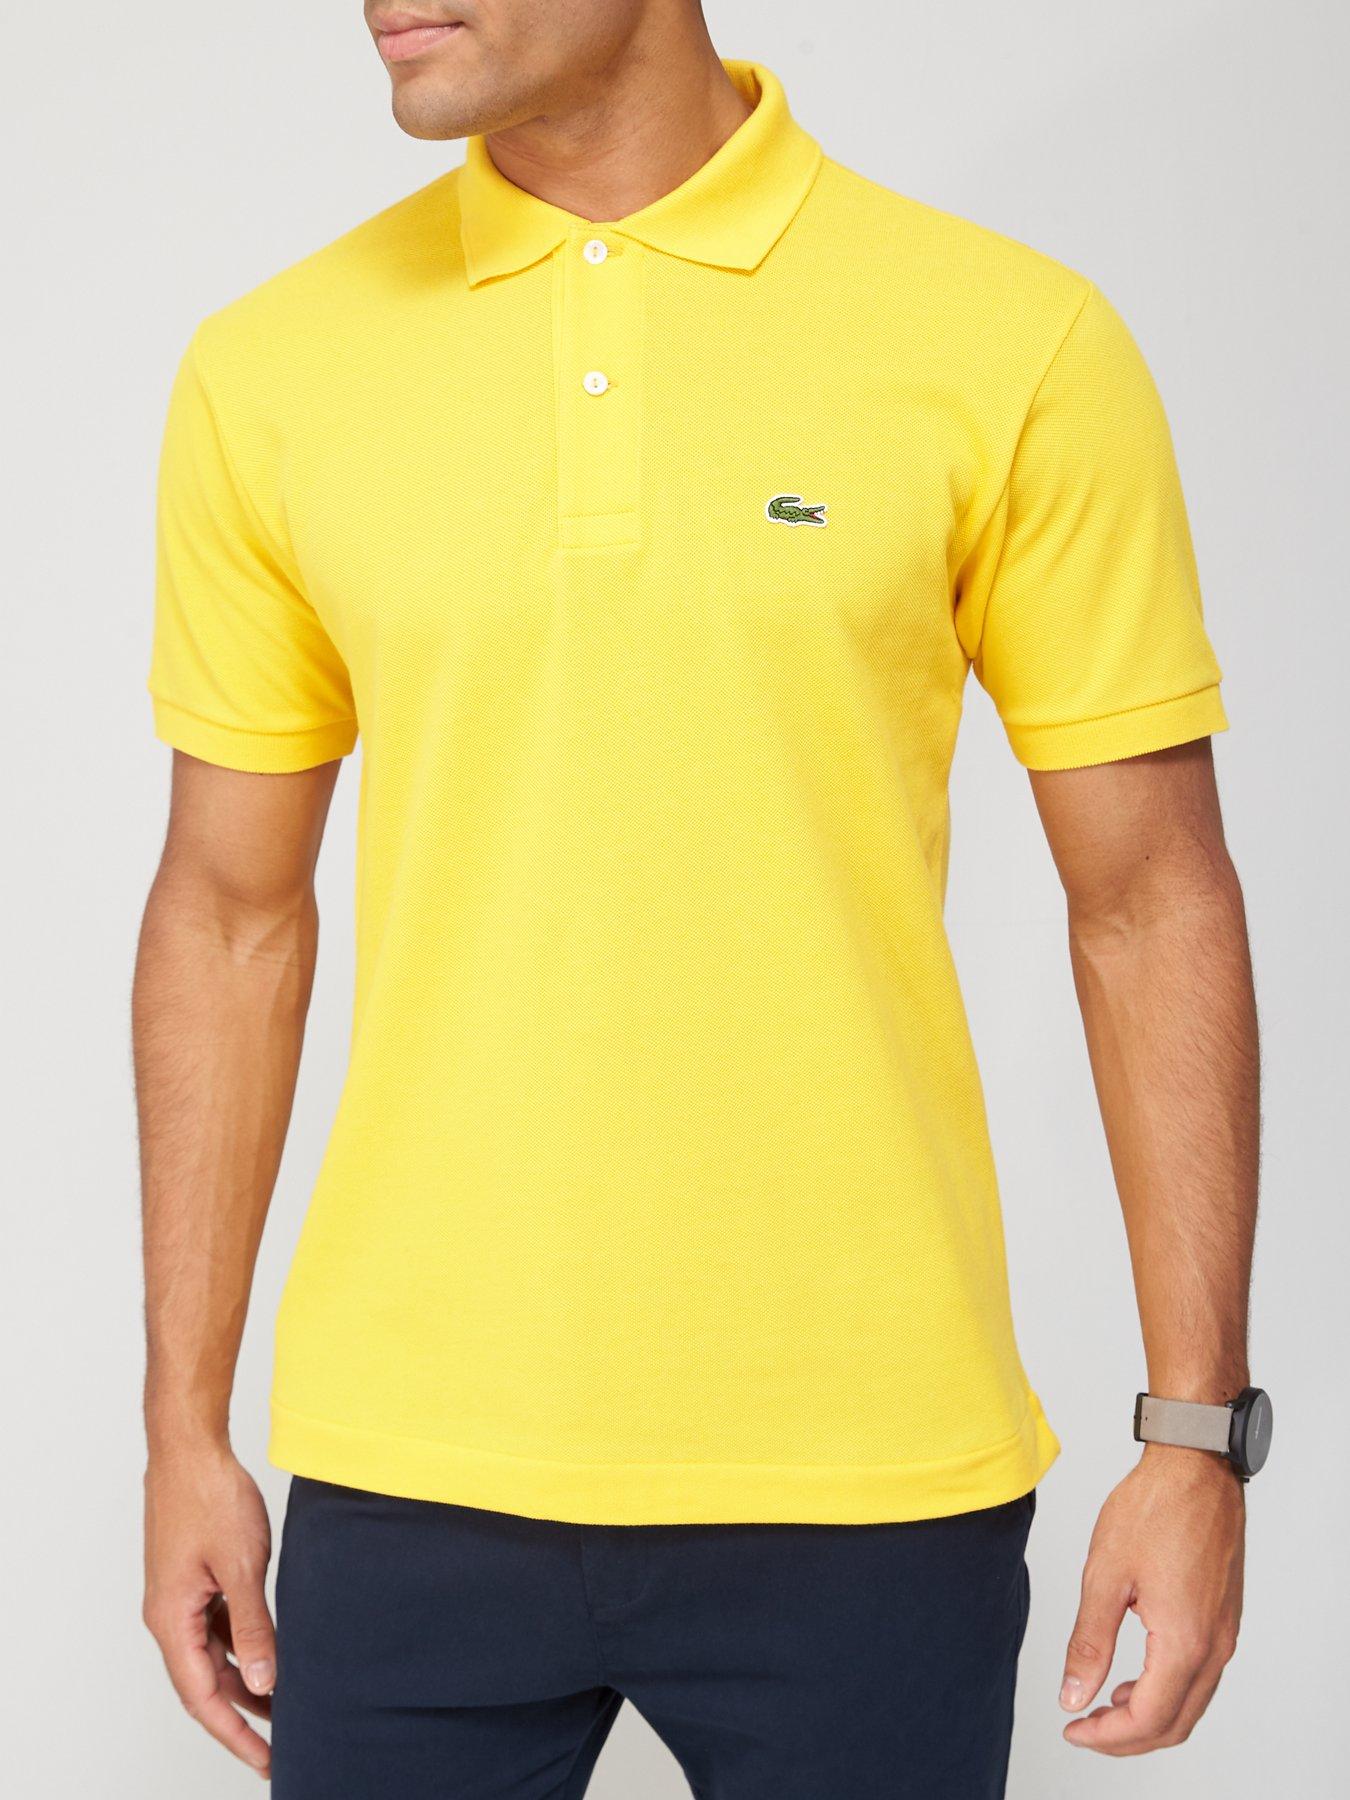 Lacoste L1212 Classic Polo Shirt - Yellow | very.co.uk